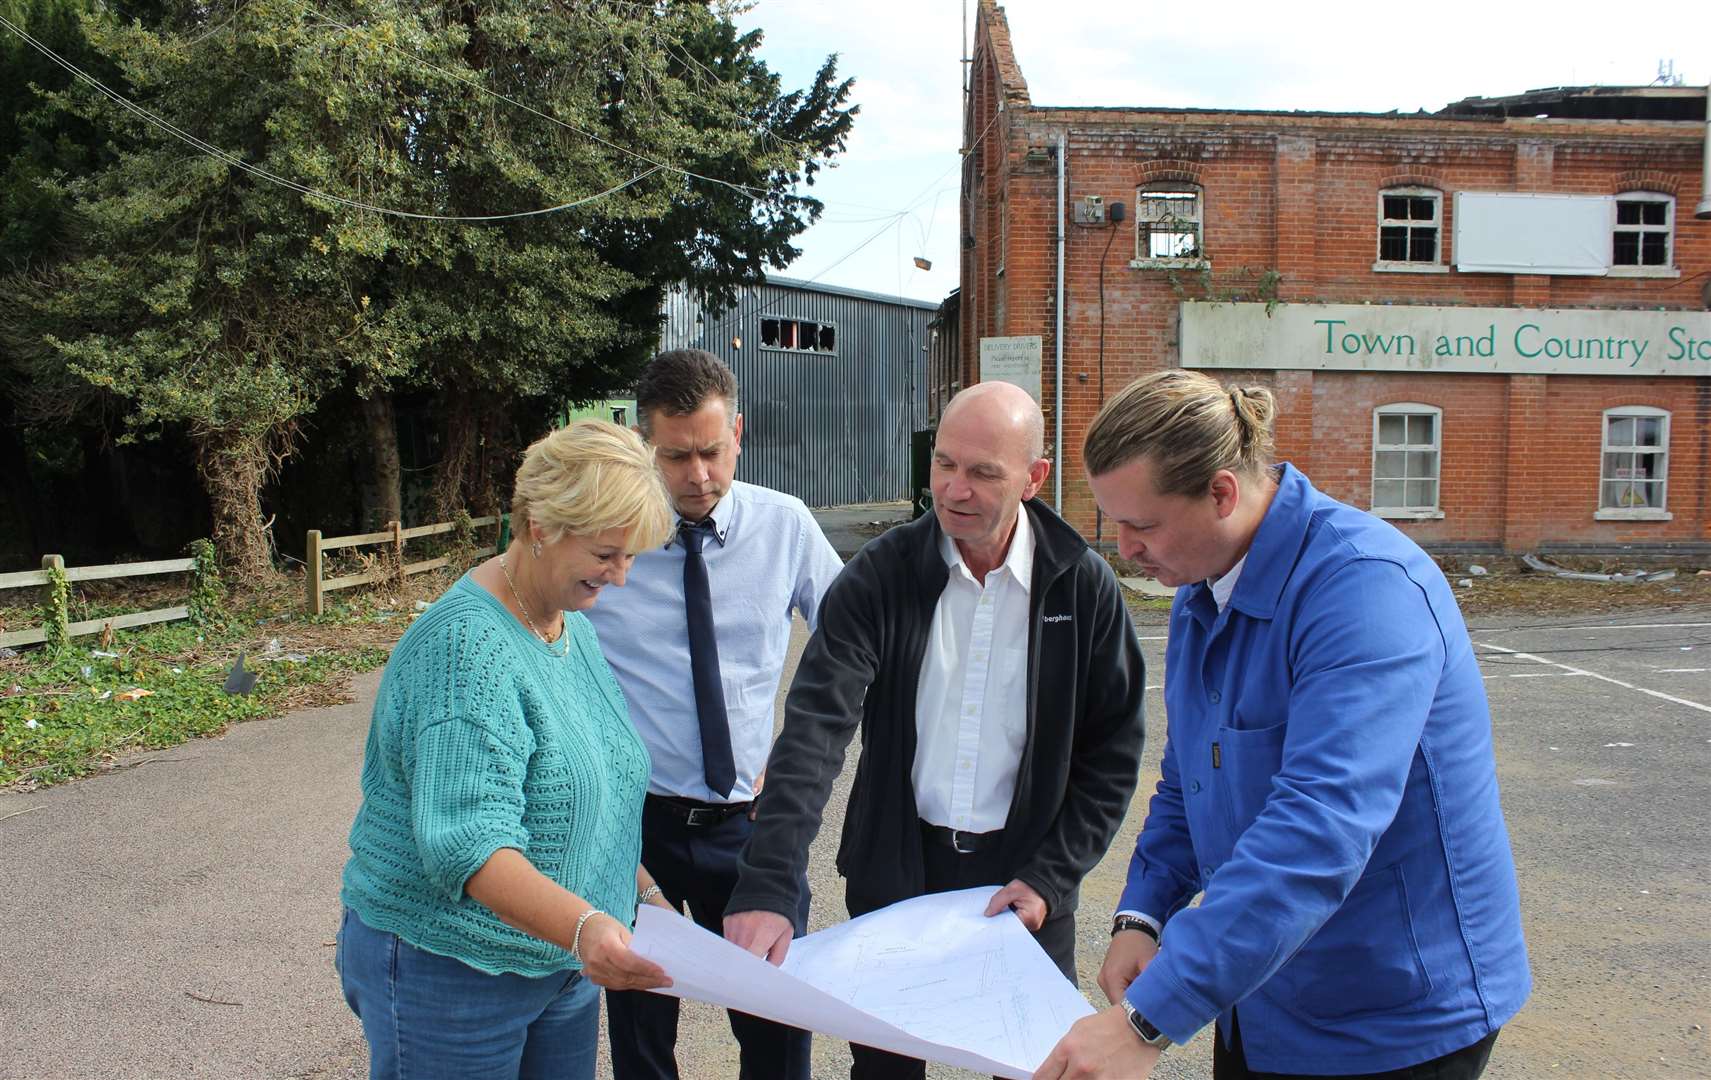 David Weir from On Architecture, right, discussed preliminary plans with ABC’s chief executive Tracey Kerly, Cllr Bill Barrett and council leader Cllr Noel Ovenden